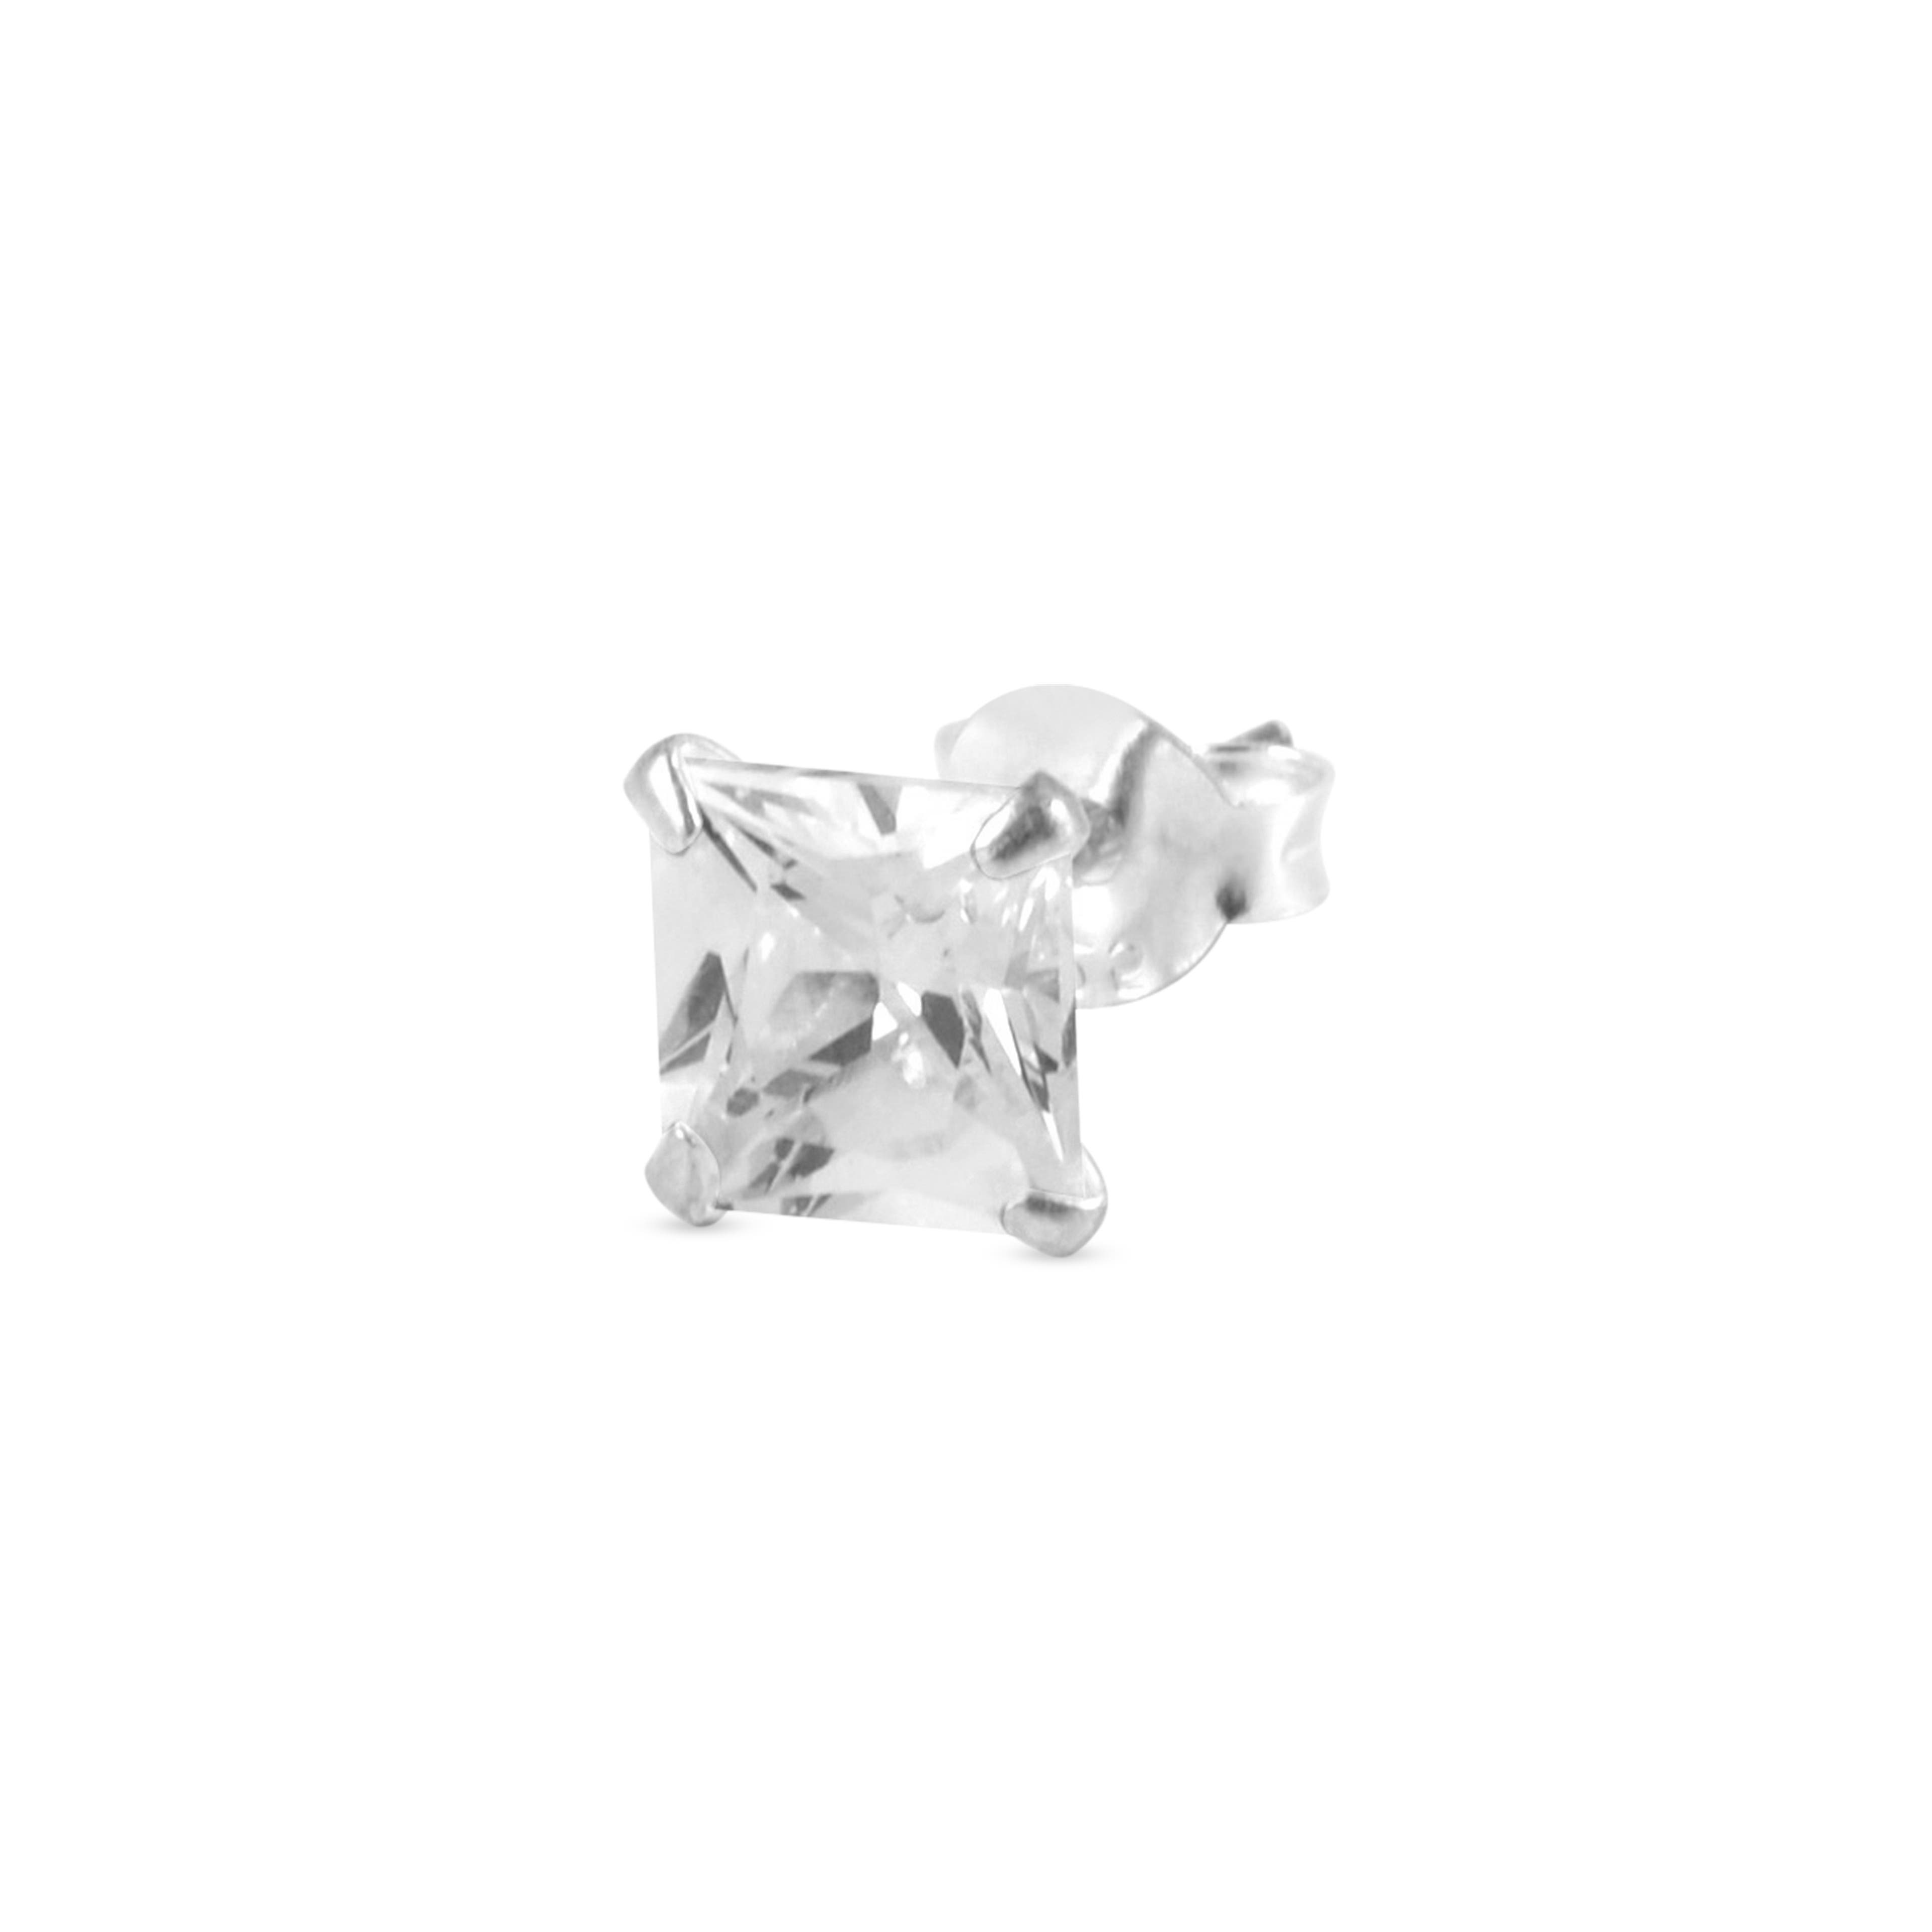 6 mm Square Zirconia & 925 Sterling Silver Stud Earring